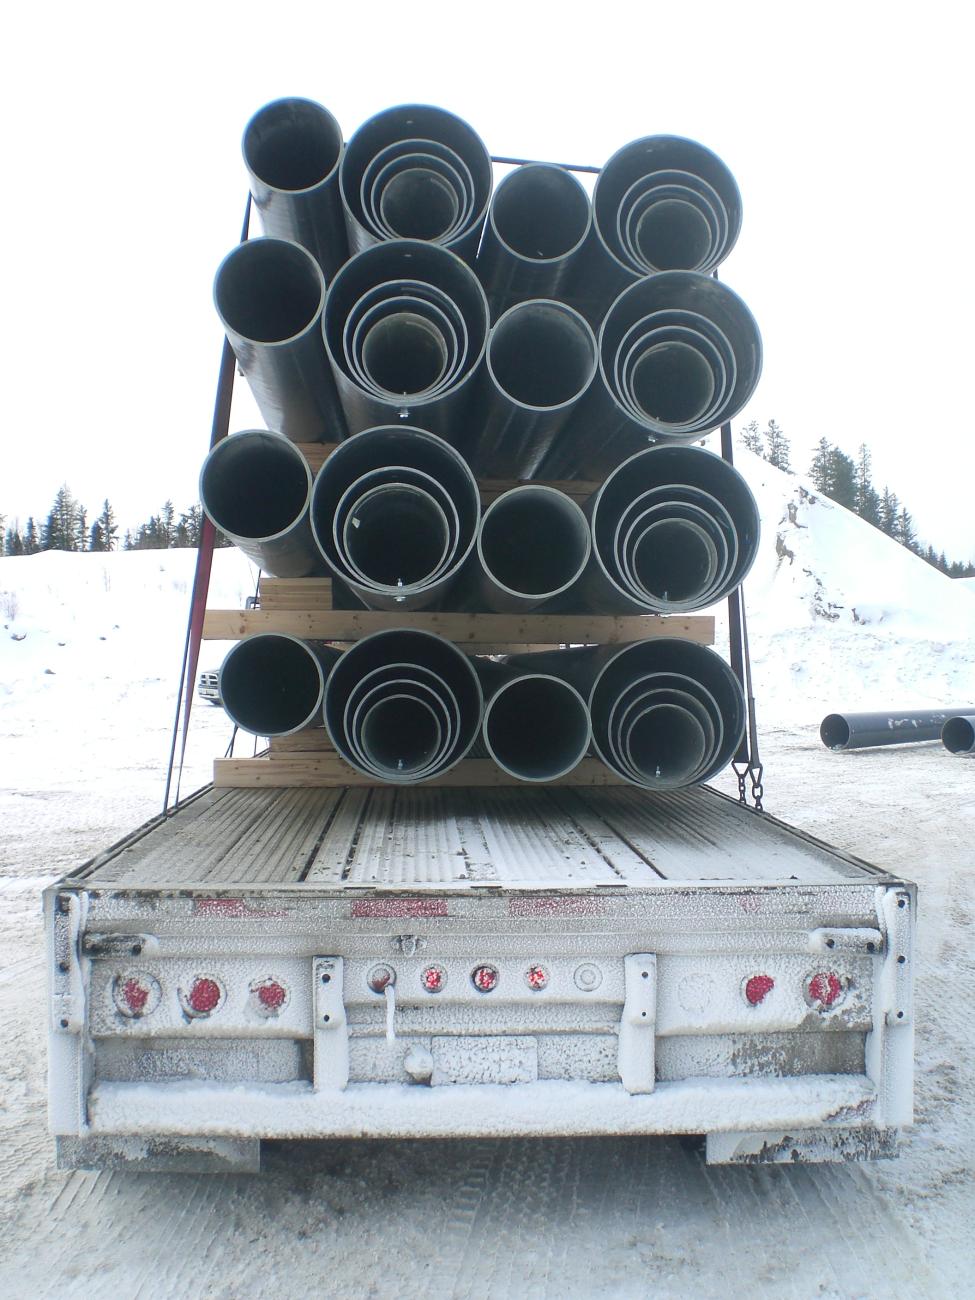 RS PowerON nested modular poles loaded and in transport